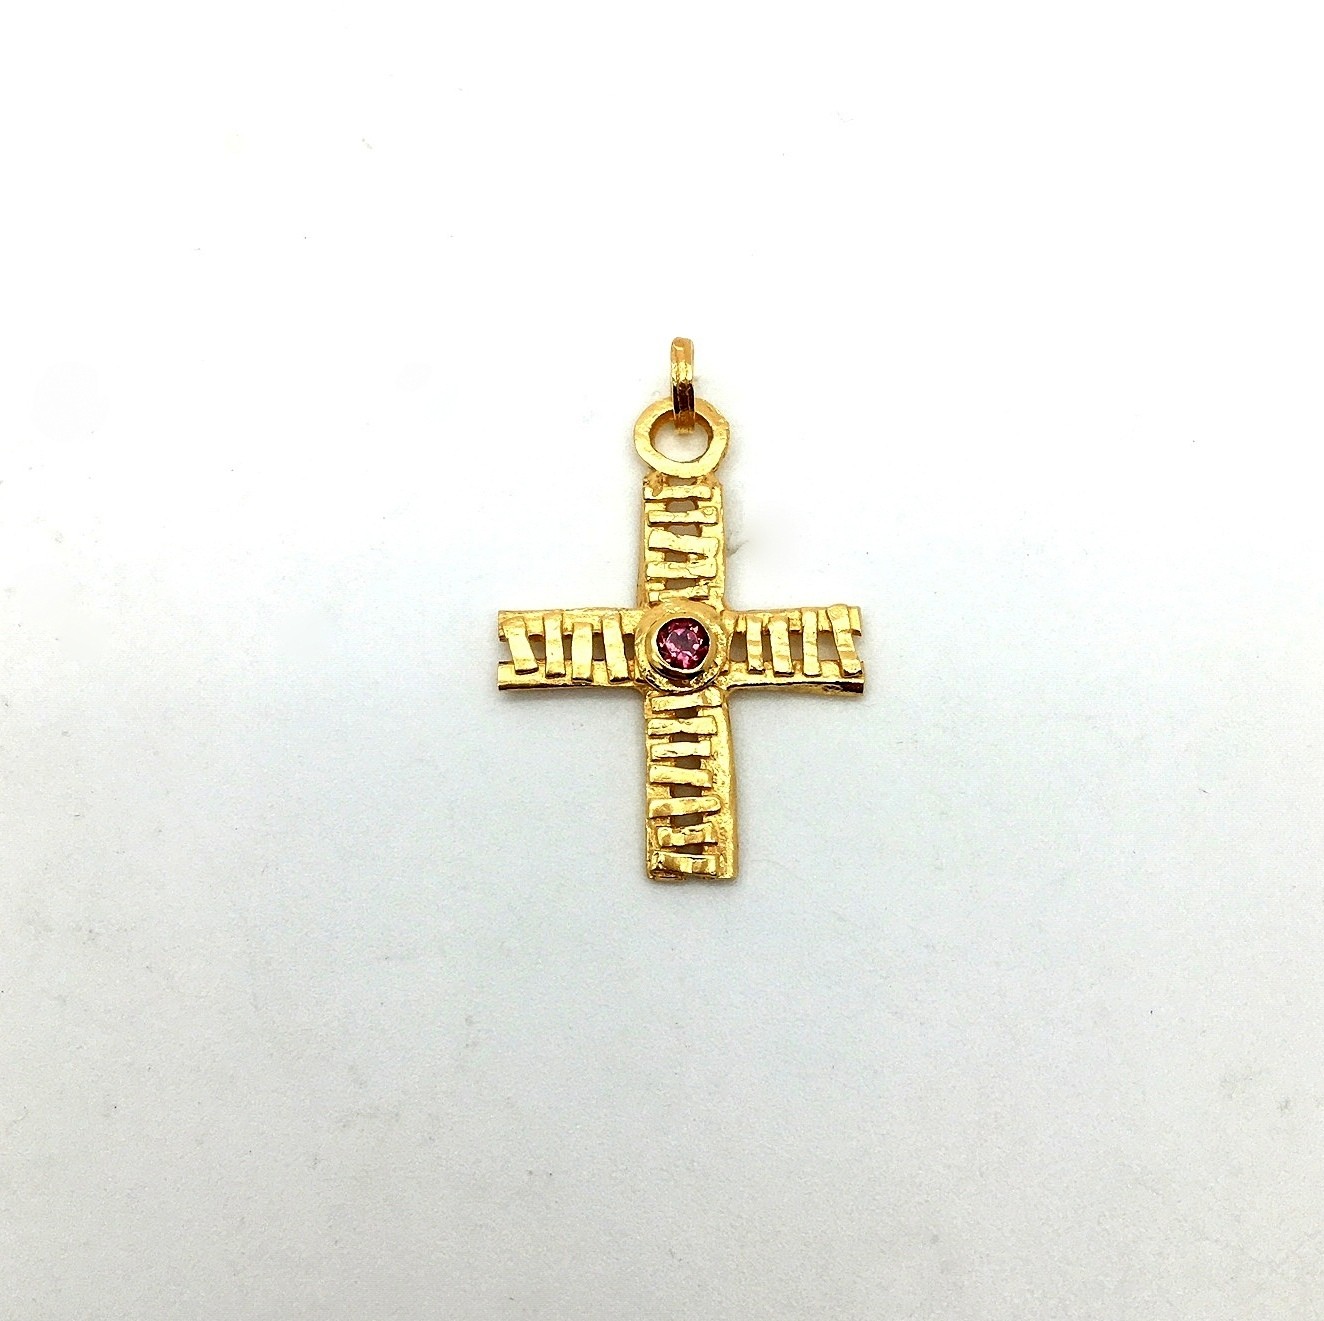 Gold or white gold cross 14K or 18K with semiprecious stones or diamonds brilliant cut